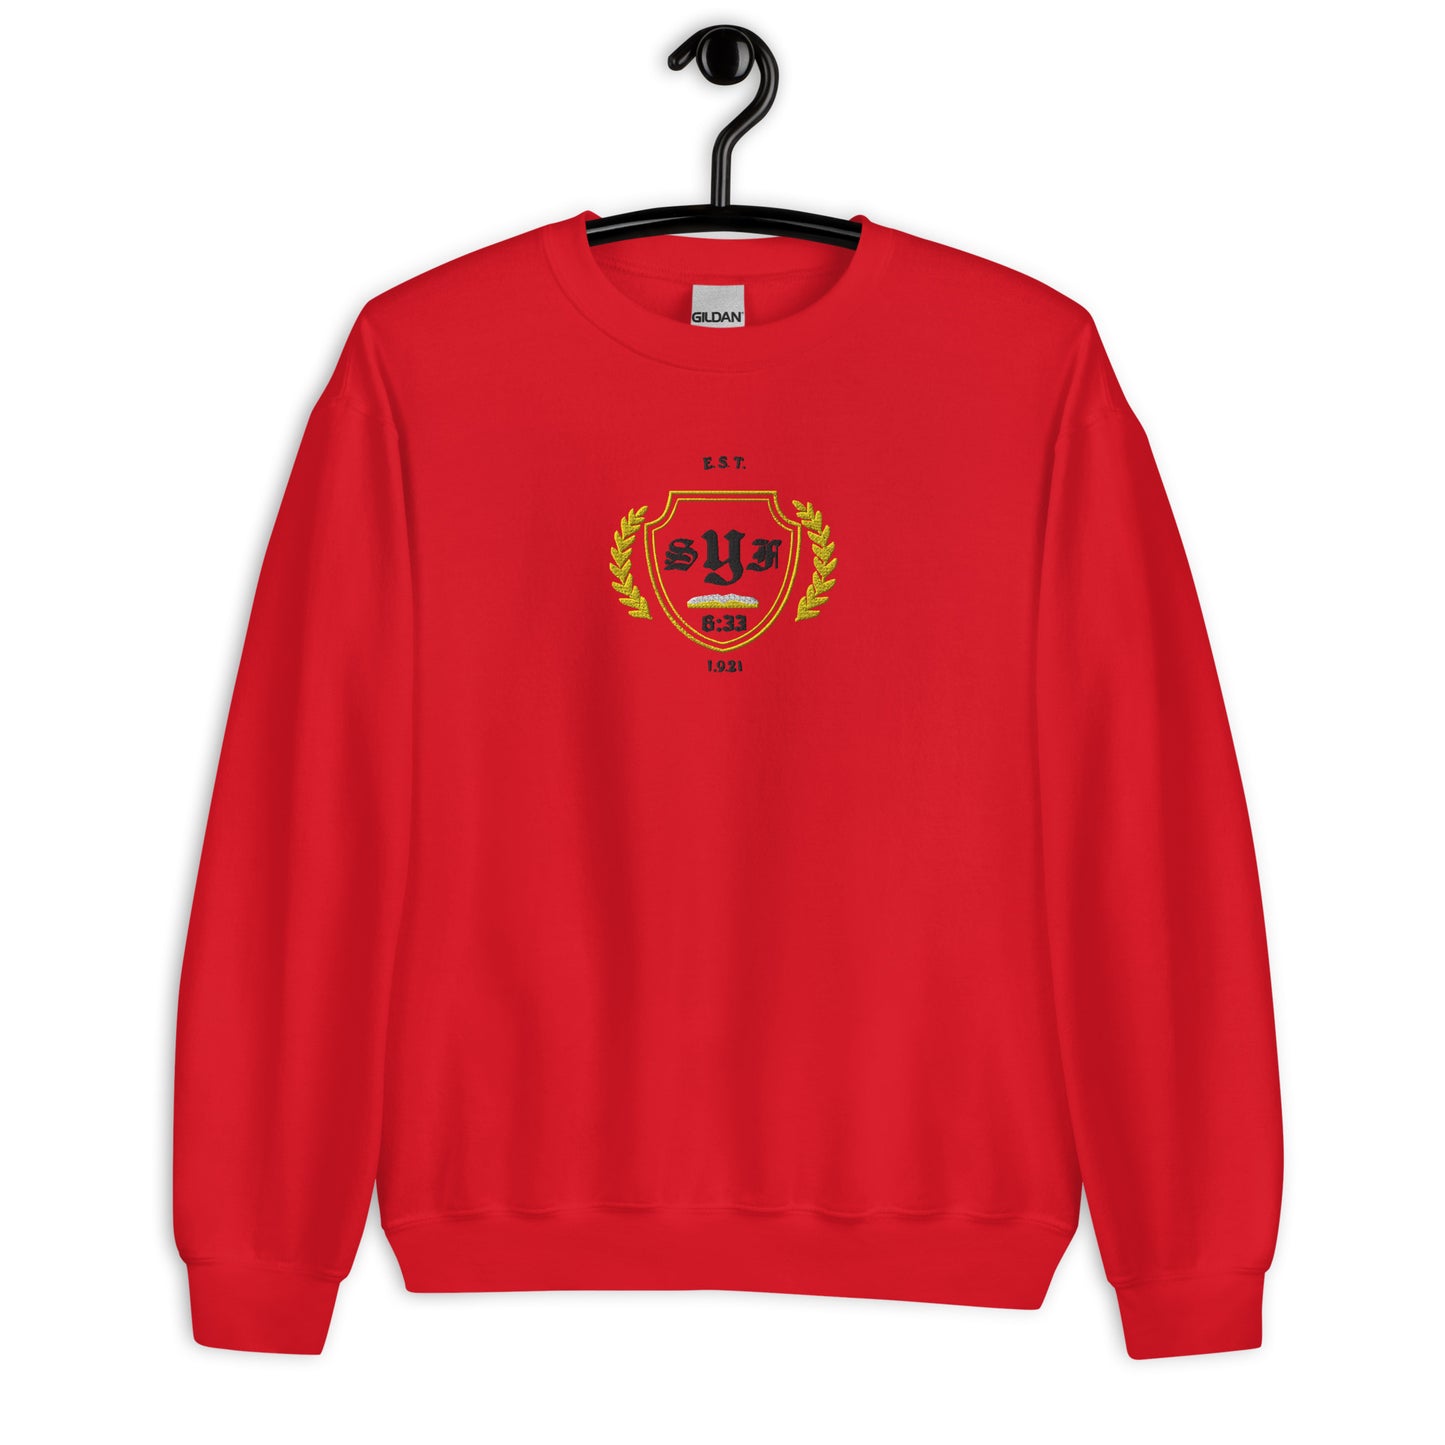 O. E. Varsity Relaxed Fit Crewneck (Red & Black)